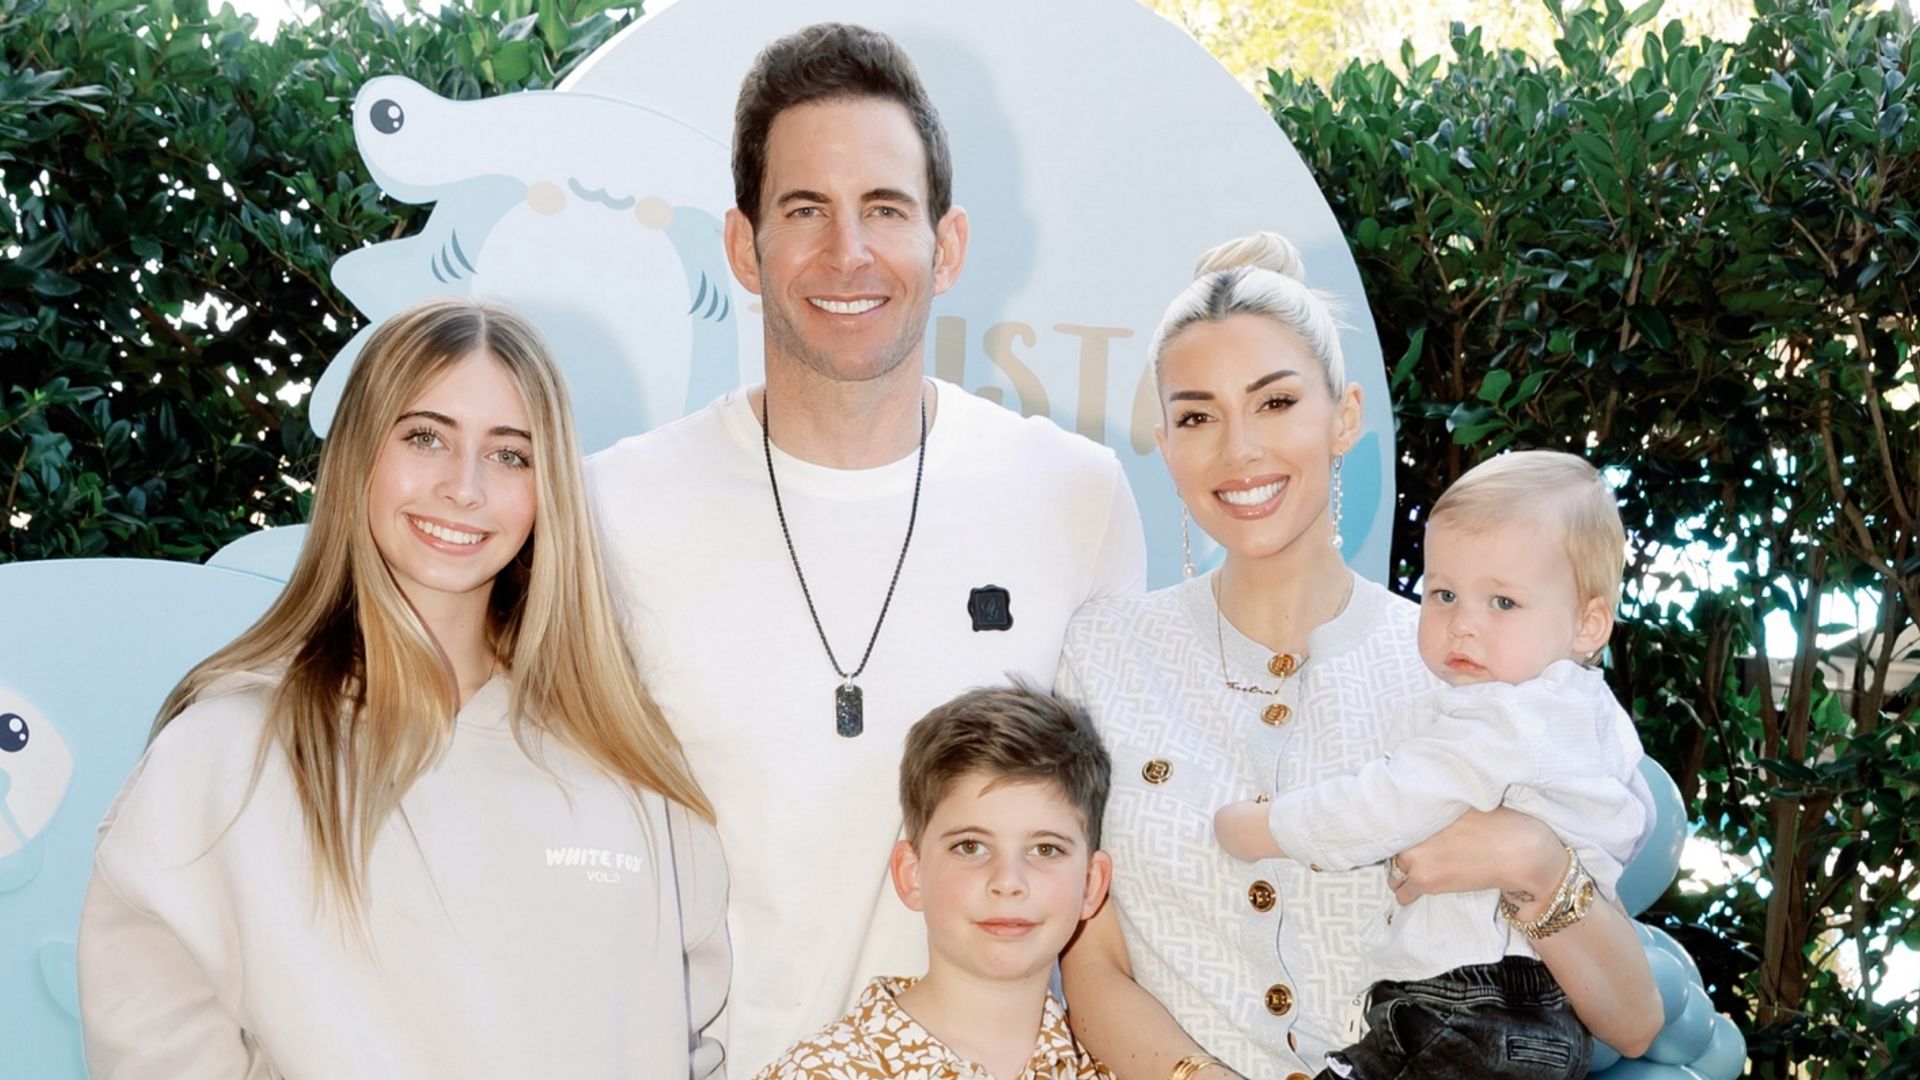 Photo posted by Heather Rae El Moussa on Instagram February 2024 featuring Tarek El Moussa, his two kids with Christina Hall, Taylor and Brayden, plus his son Tristan